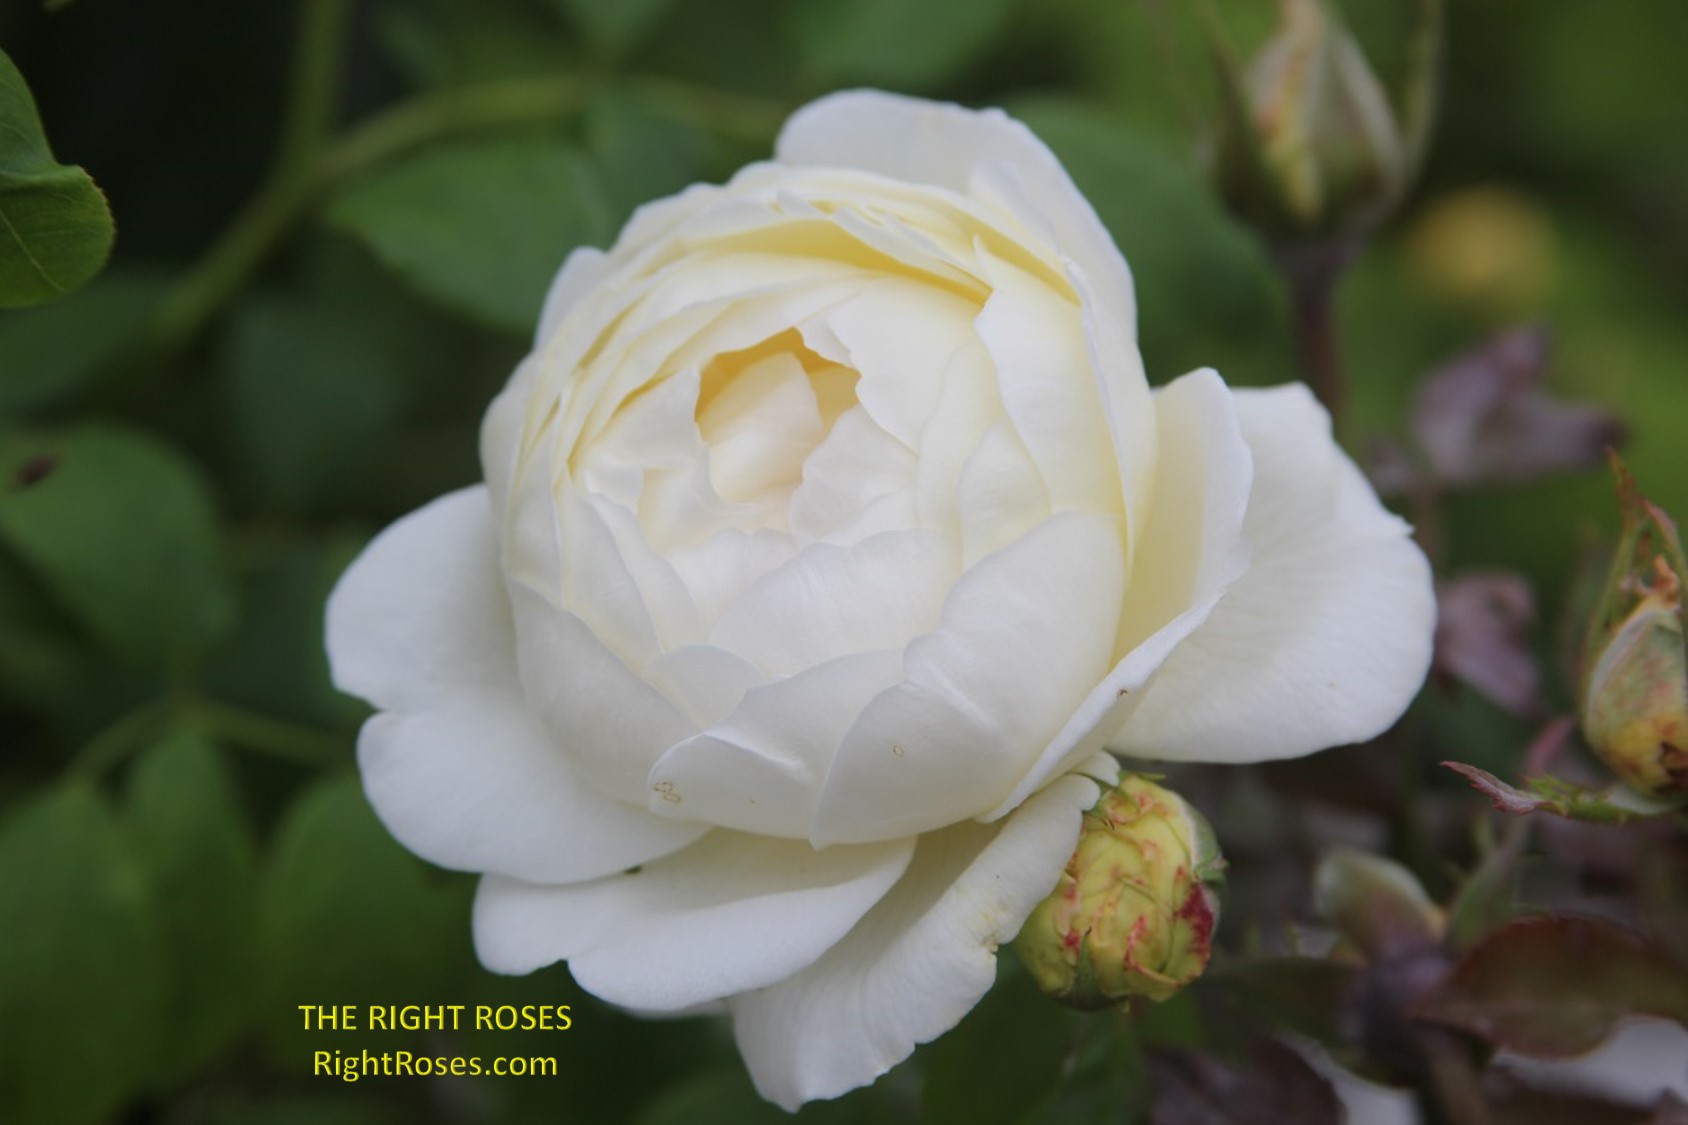 claire austin rose review the right roses score best top garden store david austin english roses rose products rose rating the right leap rose food